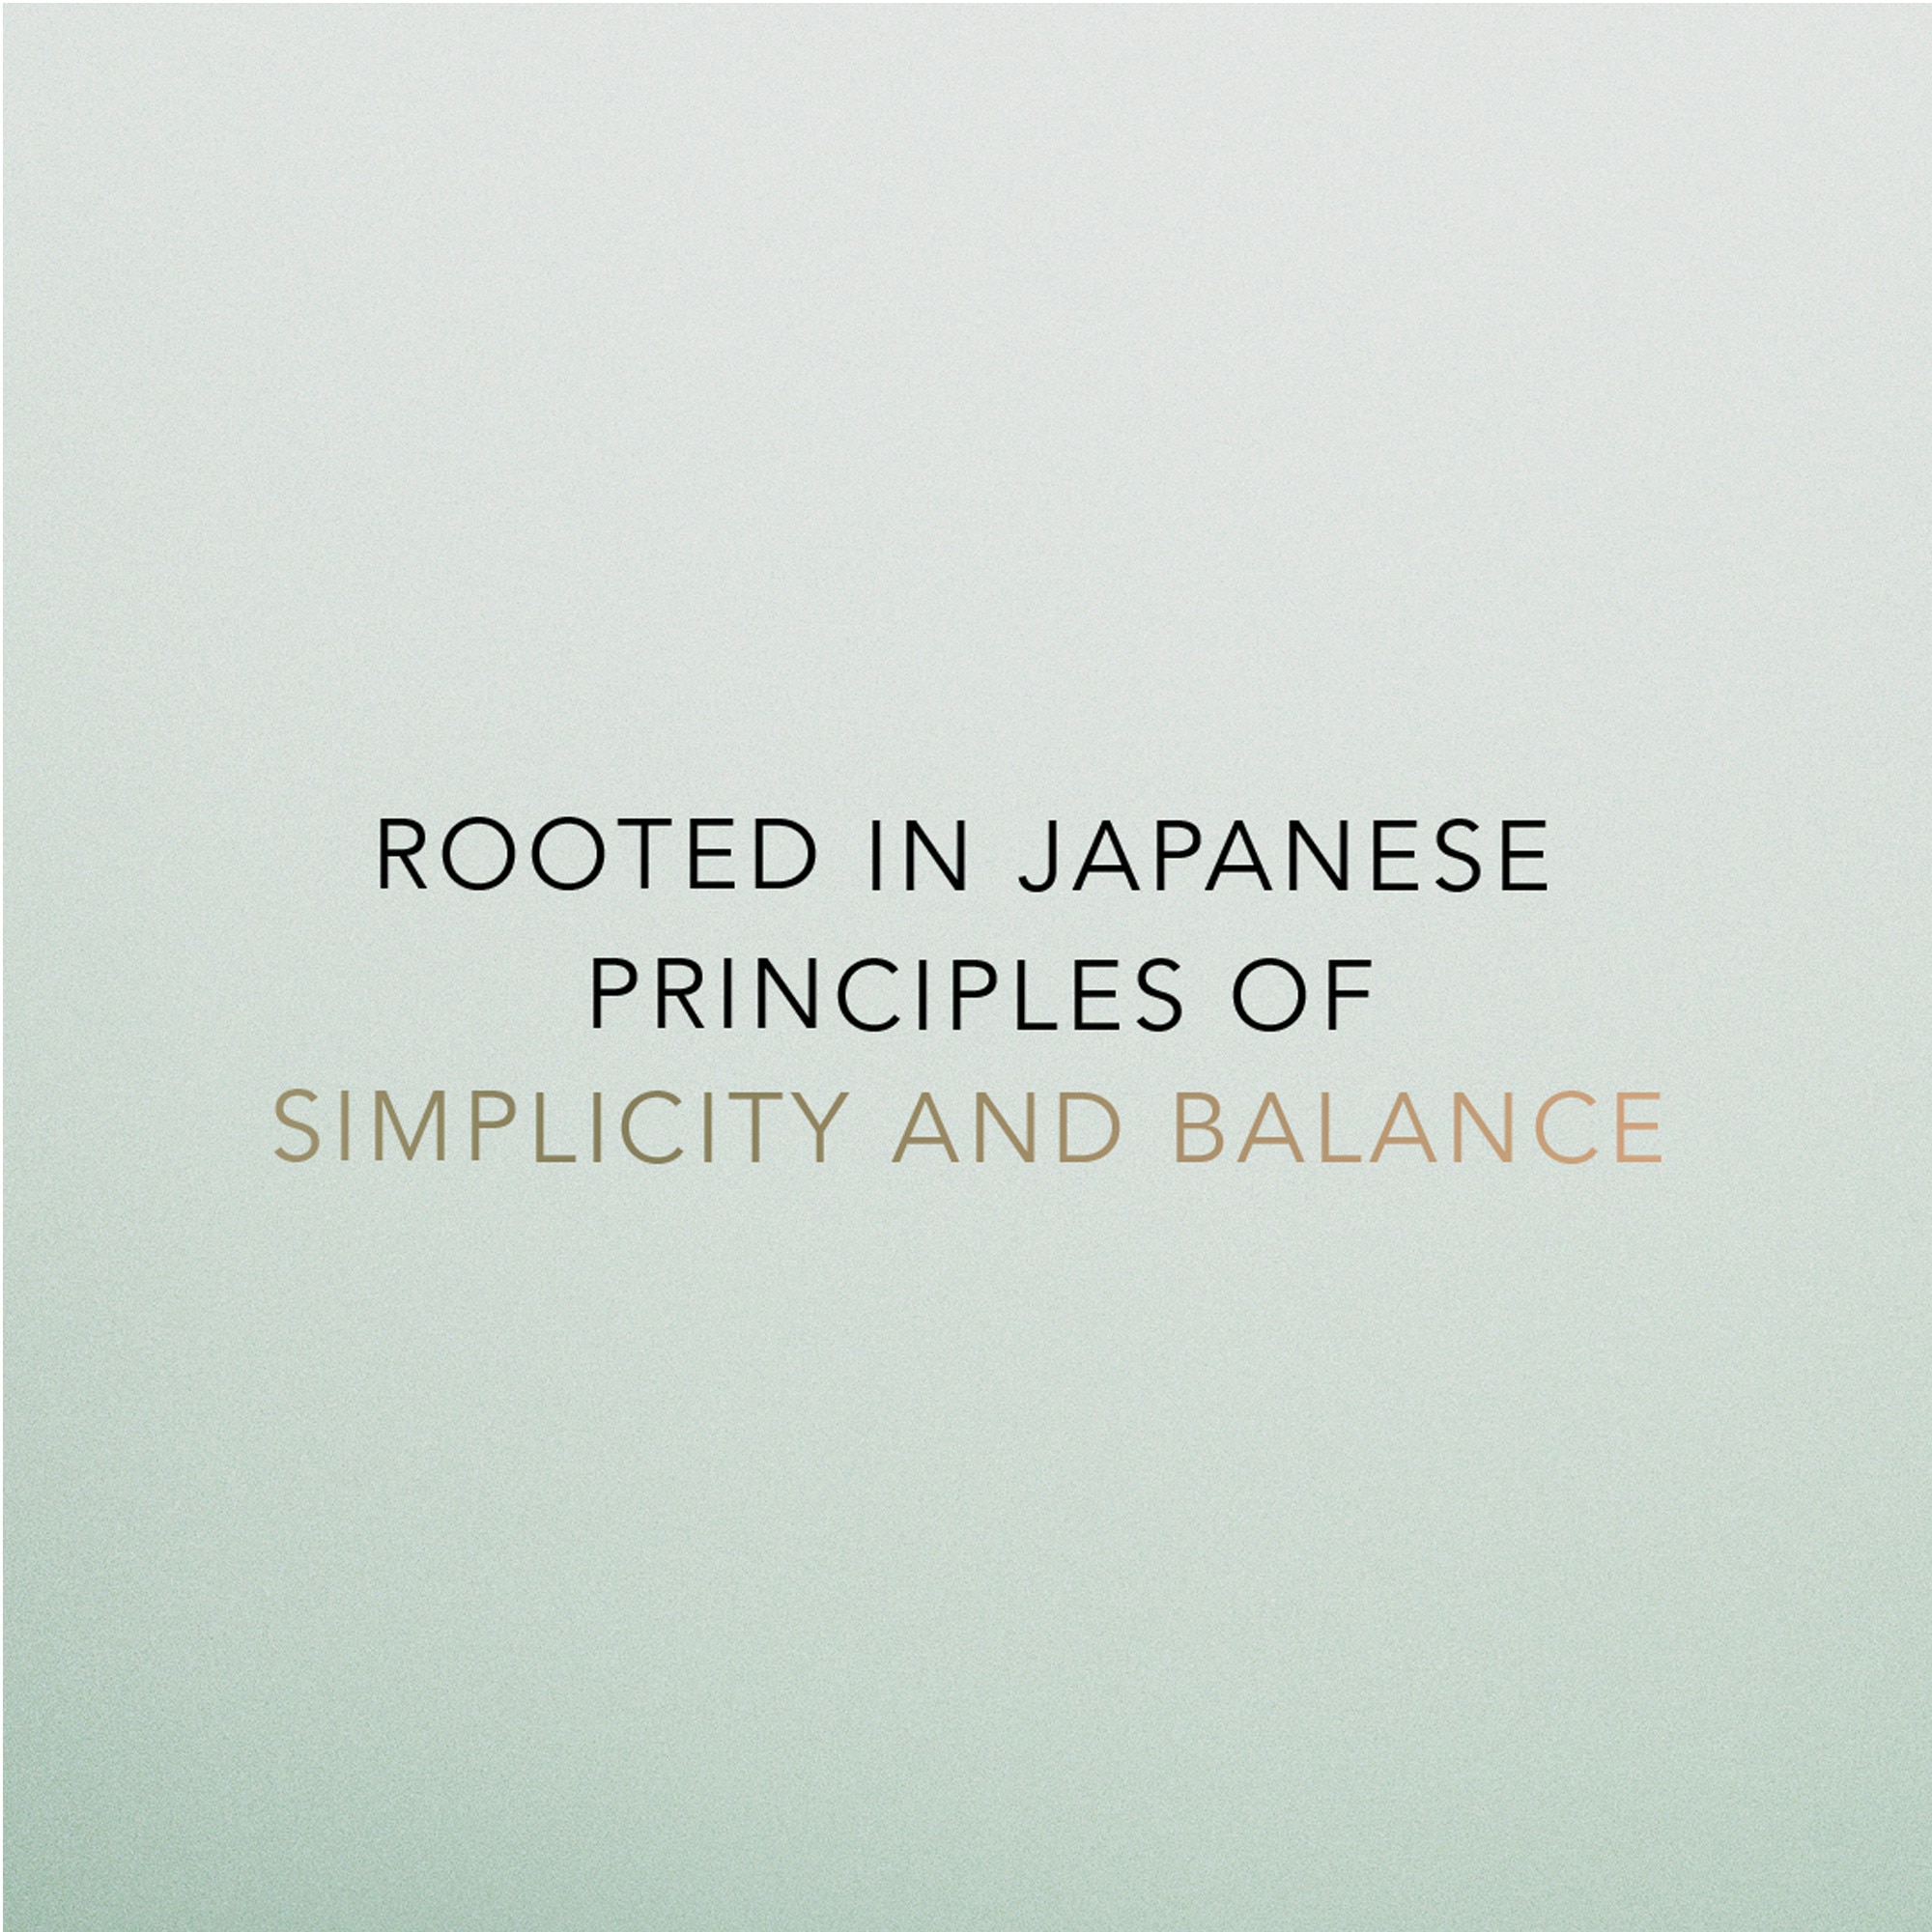 Rooted in Japanese Principles description